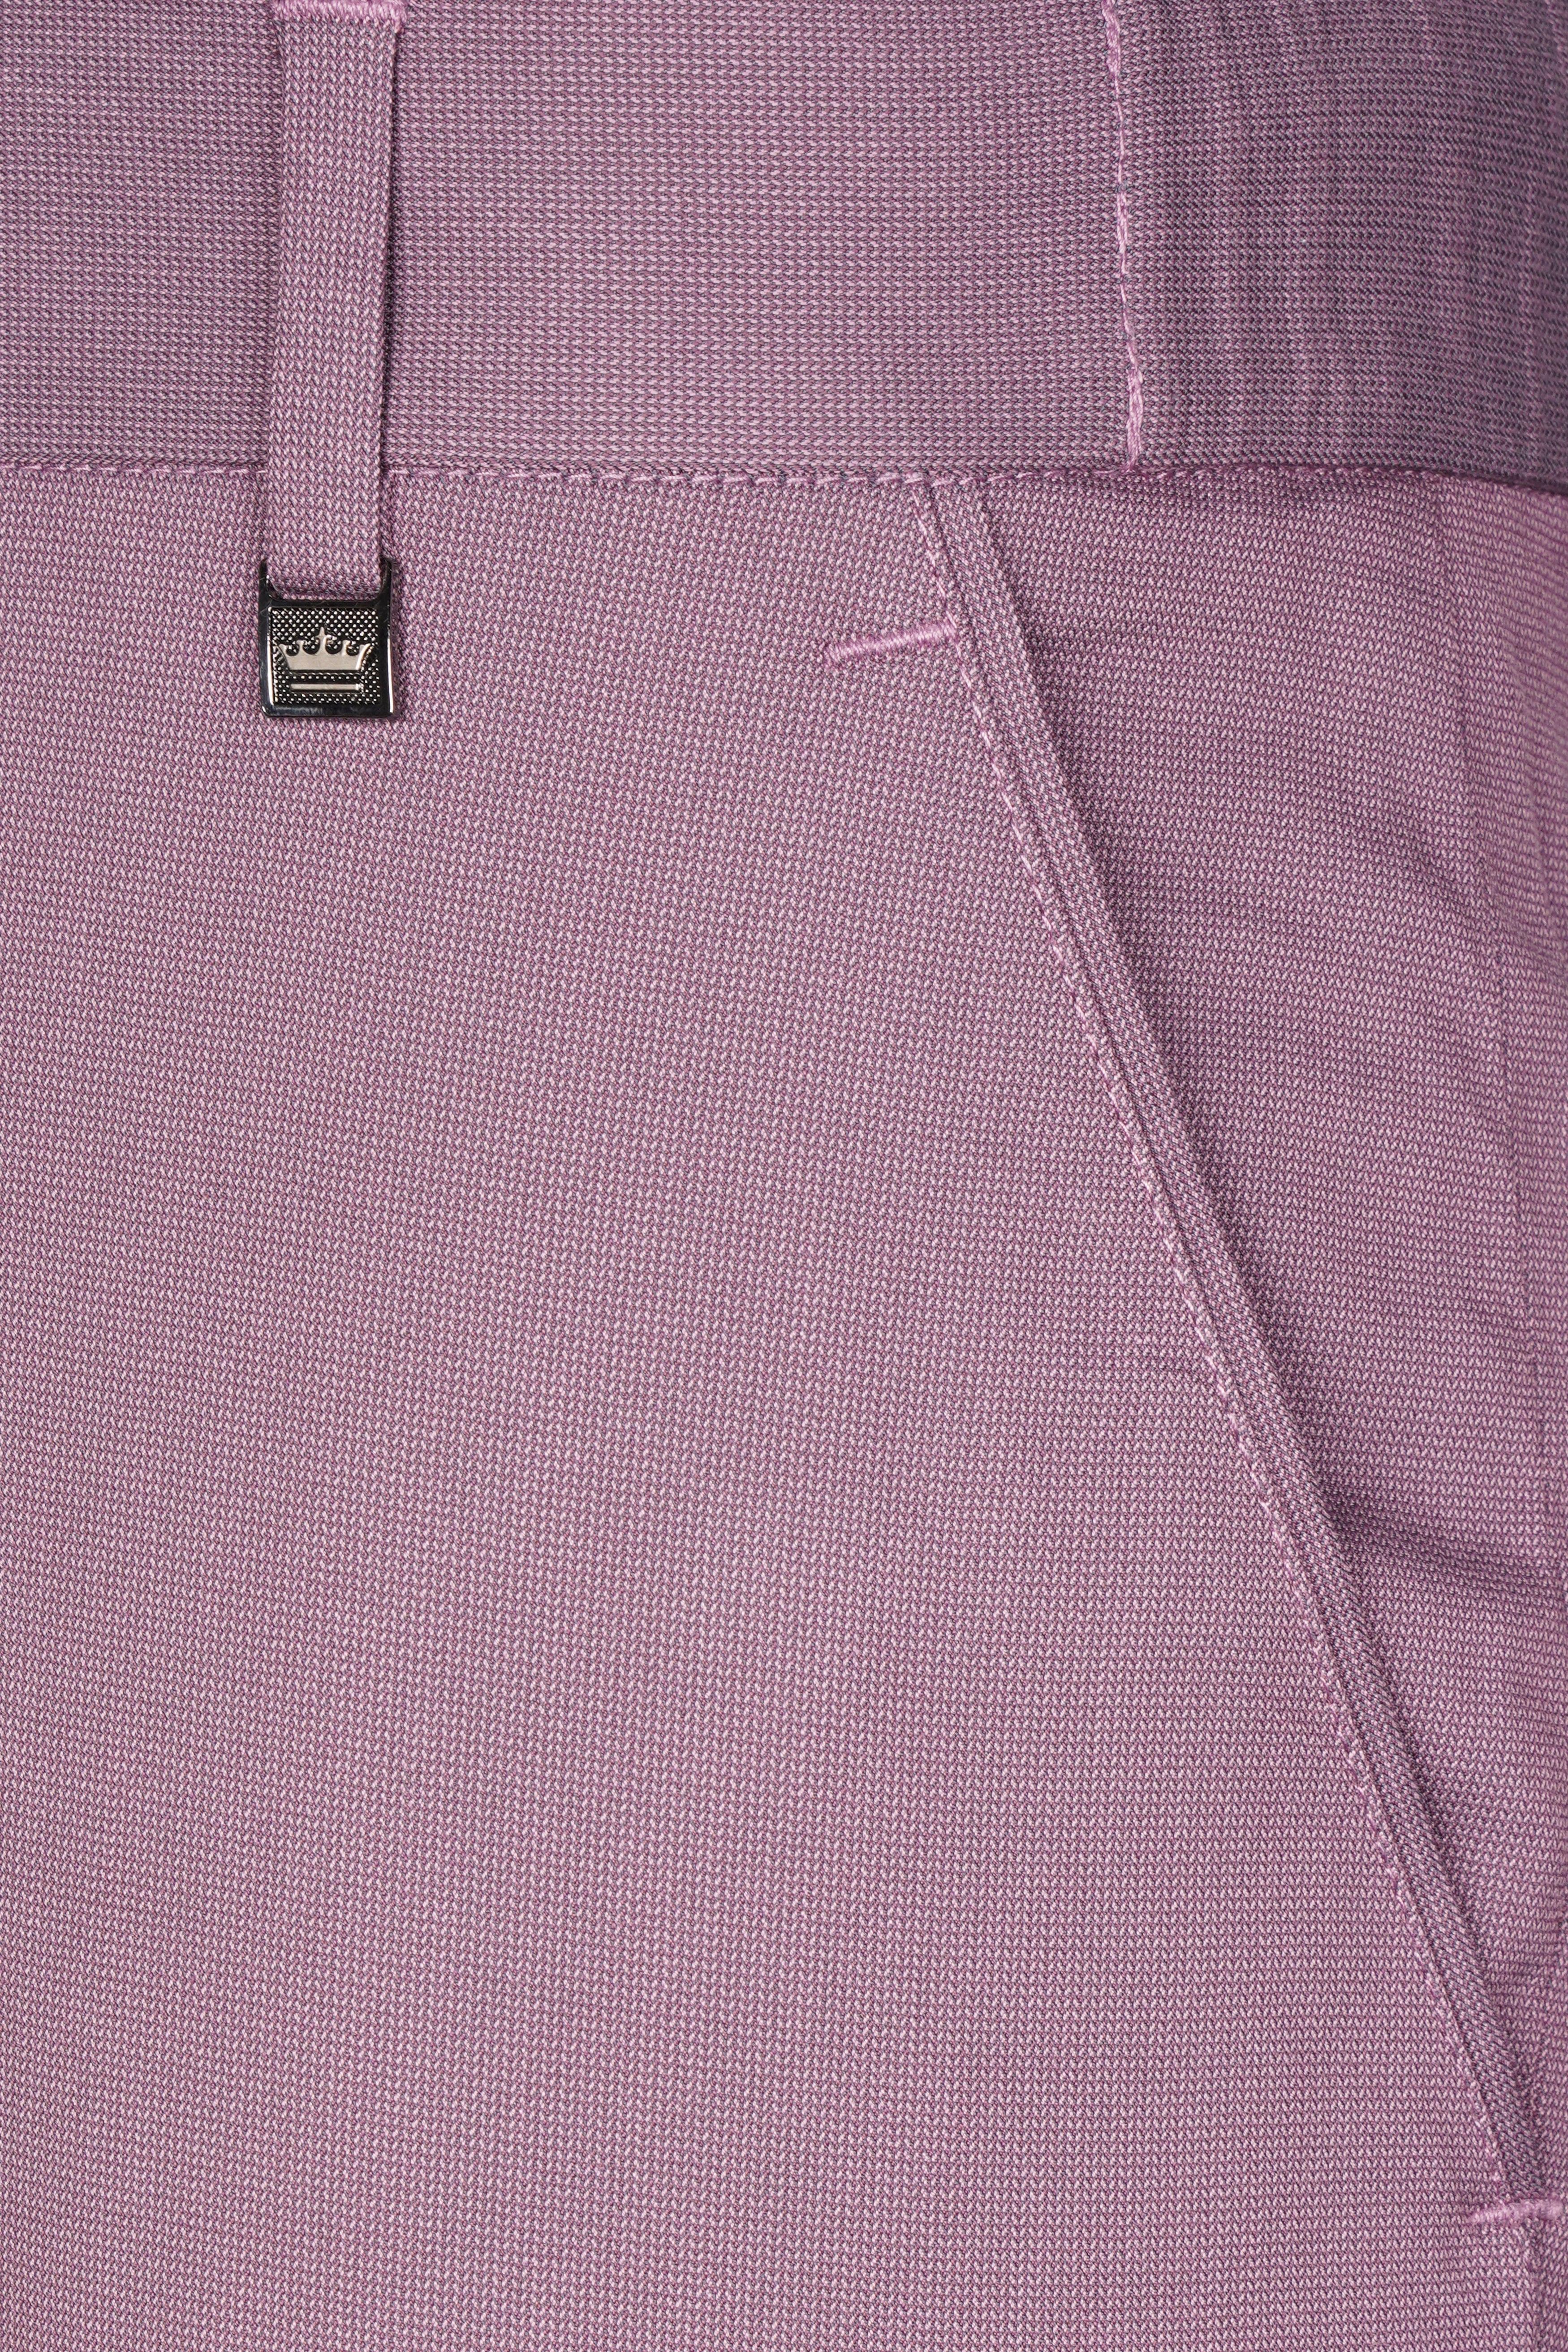 Orchid Lavender Premium Cotton Double Breasted Sports Suit ST3071-DB-PP-36, ST3071-DB-PP-38, ST3071-DB-PP-40, ST3071-DB-PP-42, ST3071-DB-PP-44, ST3071-DB-PP-46, ST3071-DB-PP-48, ST3071-DB-PP-50, ST3071-DB-PP-52, ST3071-DB-PP-54, ST3071-DB-PP-56, ST3071-DB-PP-58, ST3071-DB-PP-60